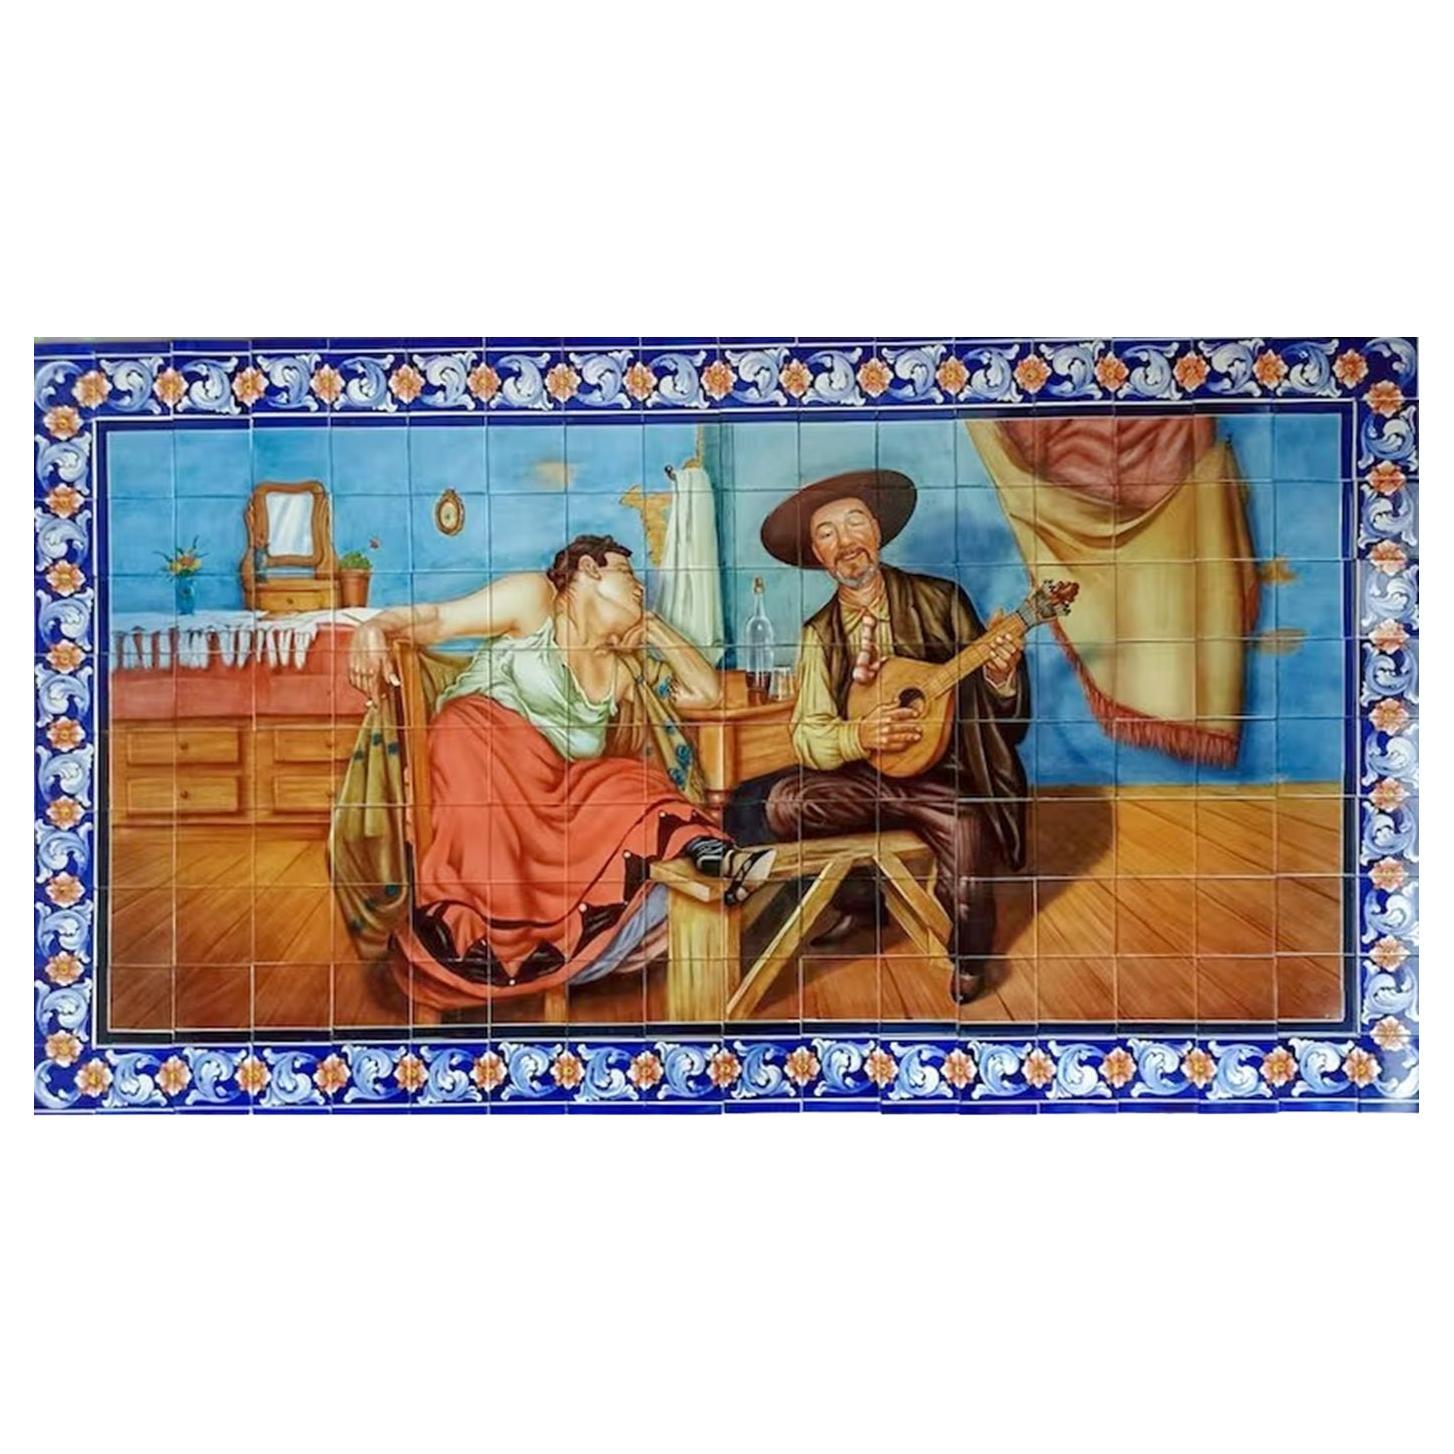 Azulejos Portuguese Hand Painted Tile Mural "Fado" Signed by Artist For Sale